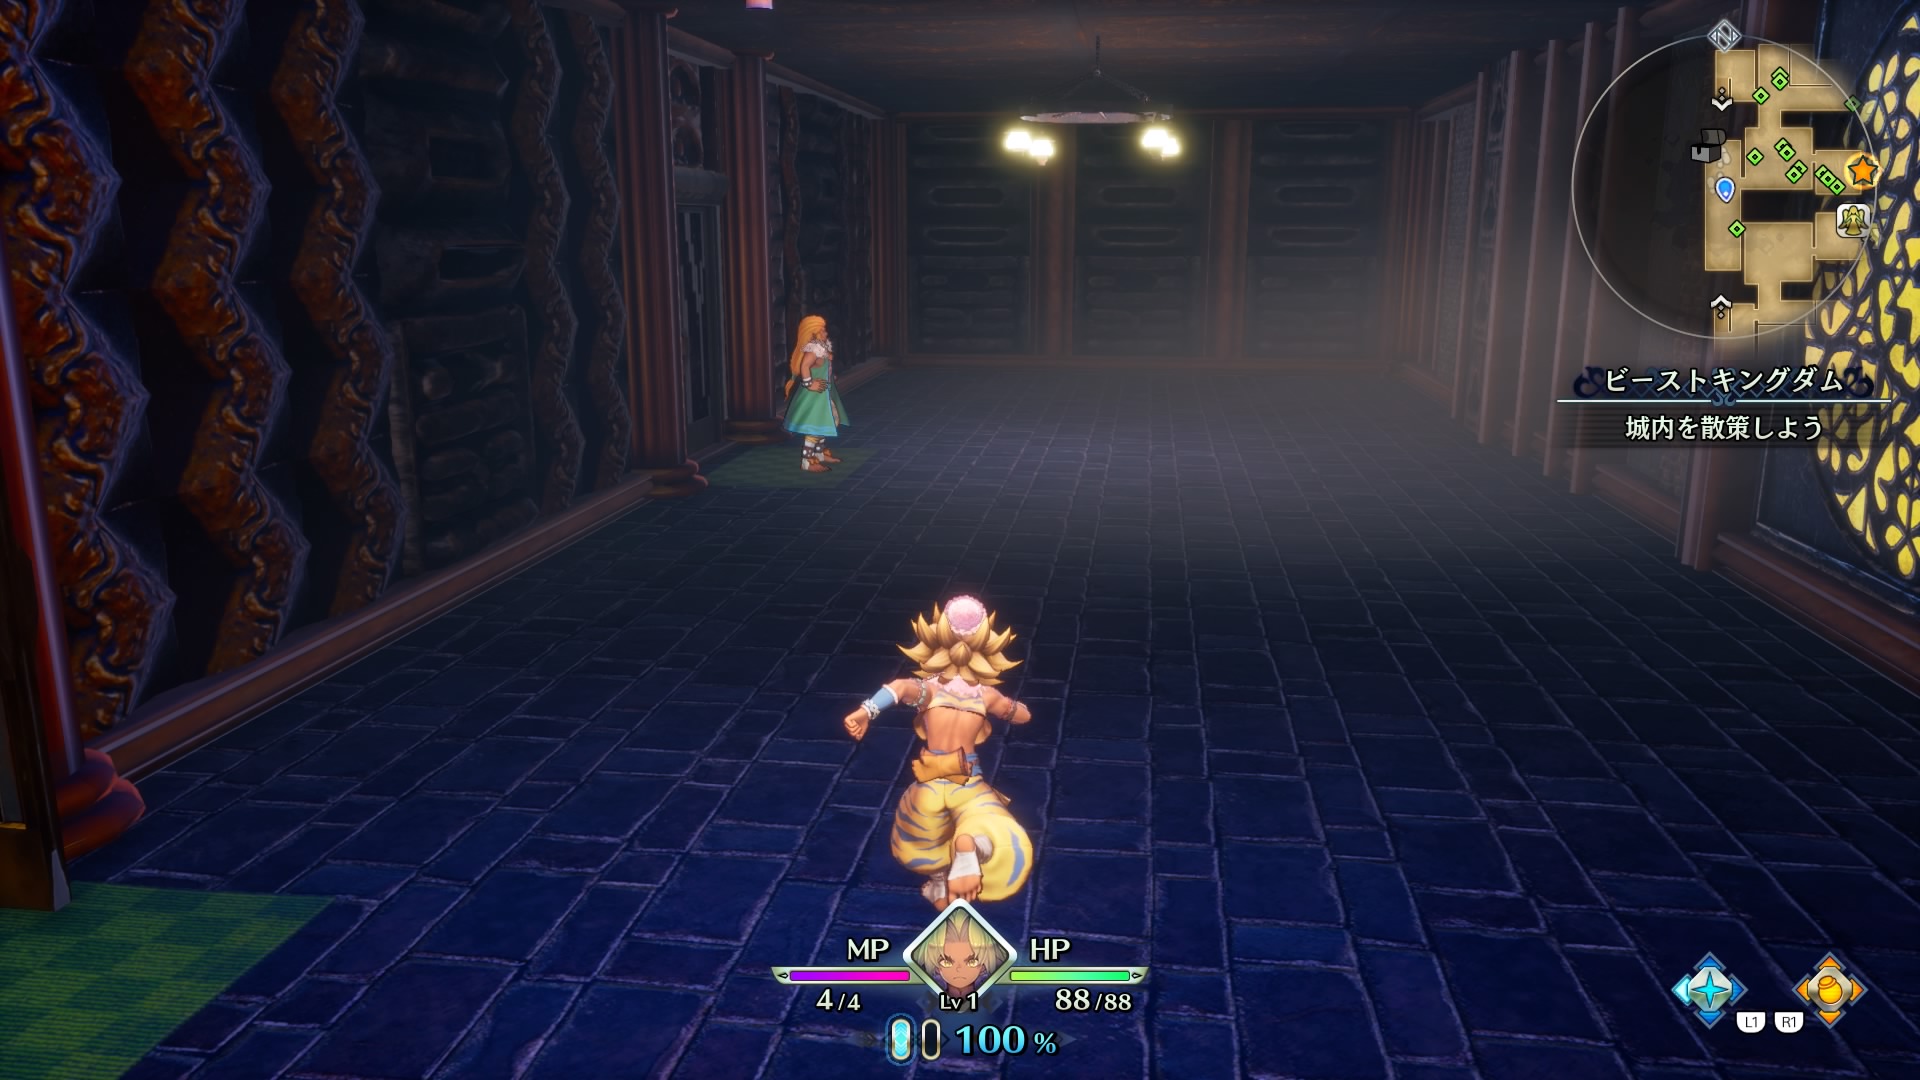 https://www.perfectly-nintendo.com/wp-content/uploads/sites/1/nggallery/trials-of-mana-3-17-03-2020/45.jpg